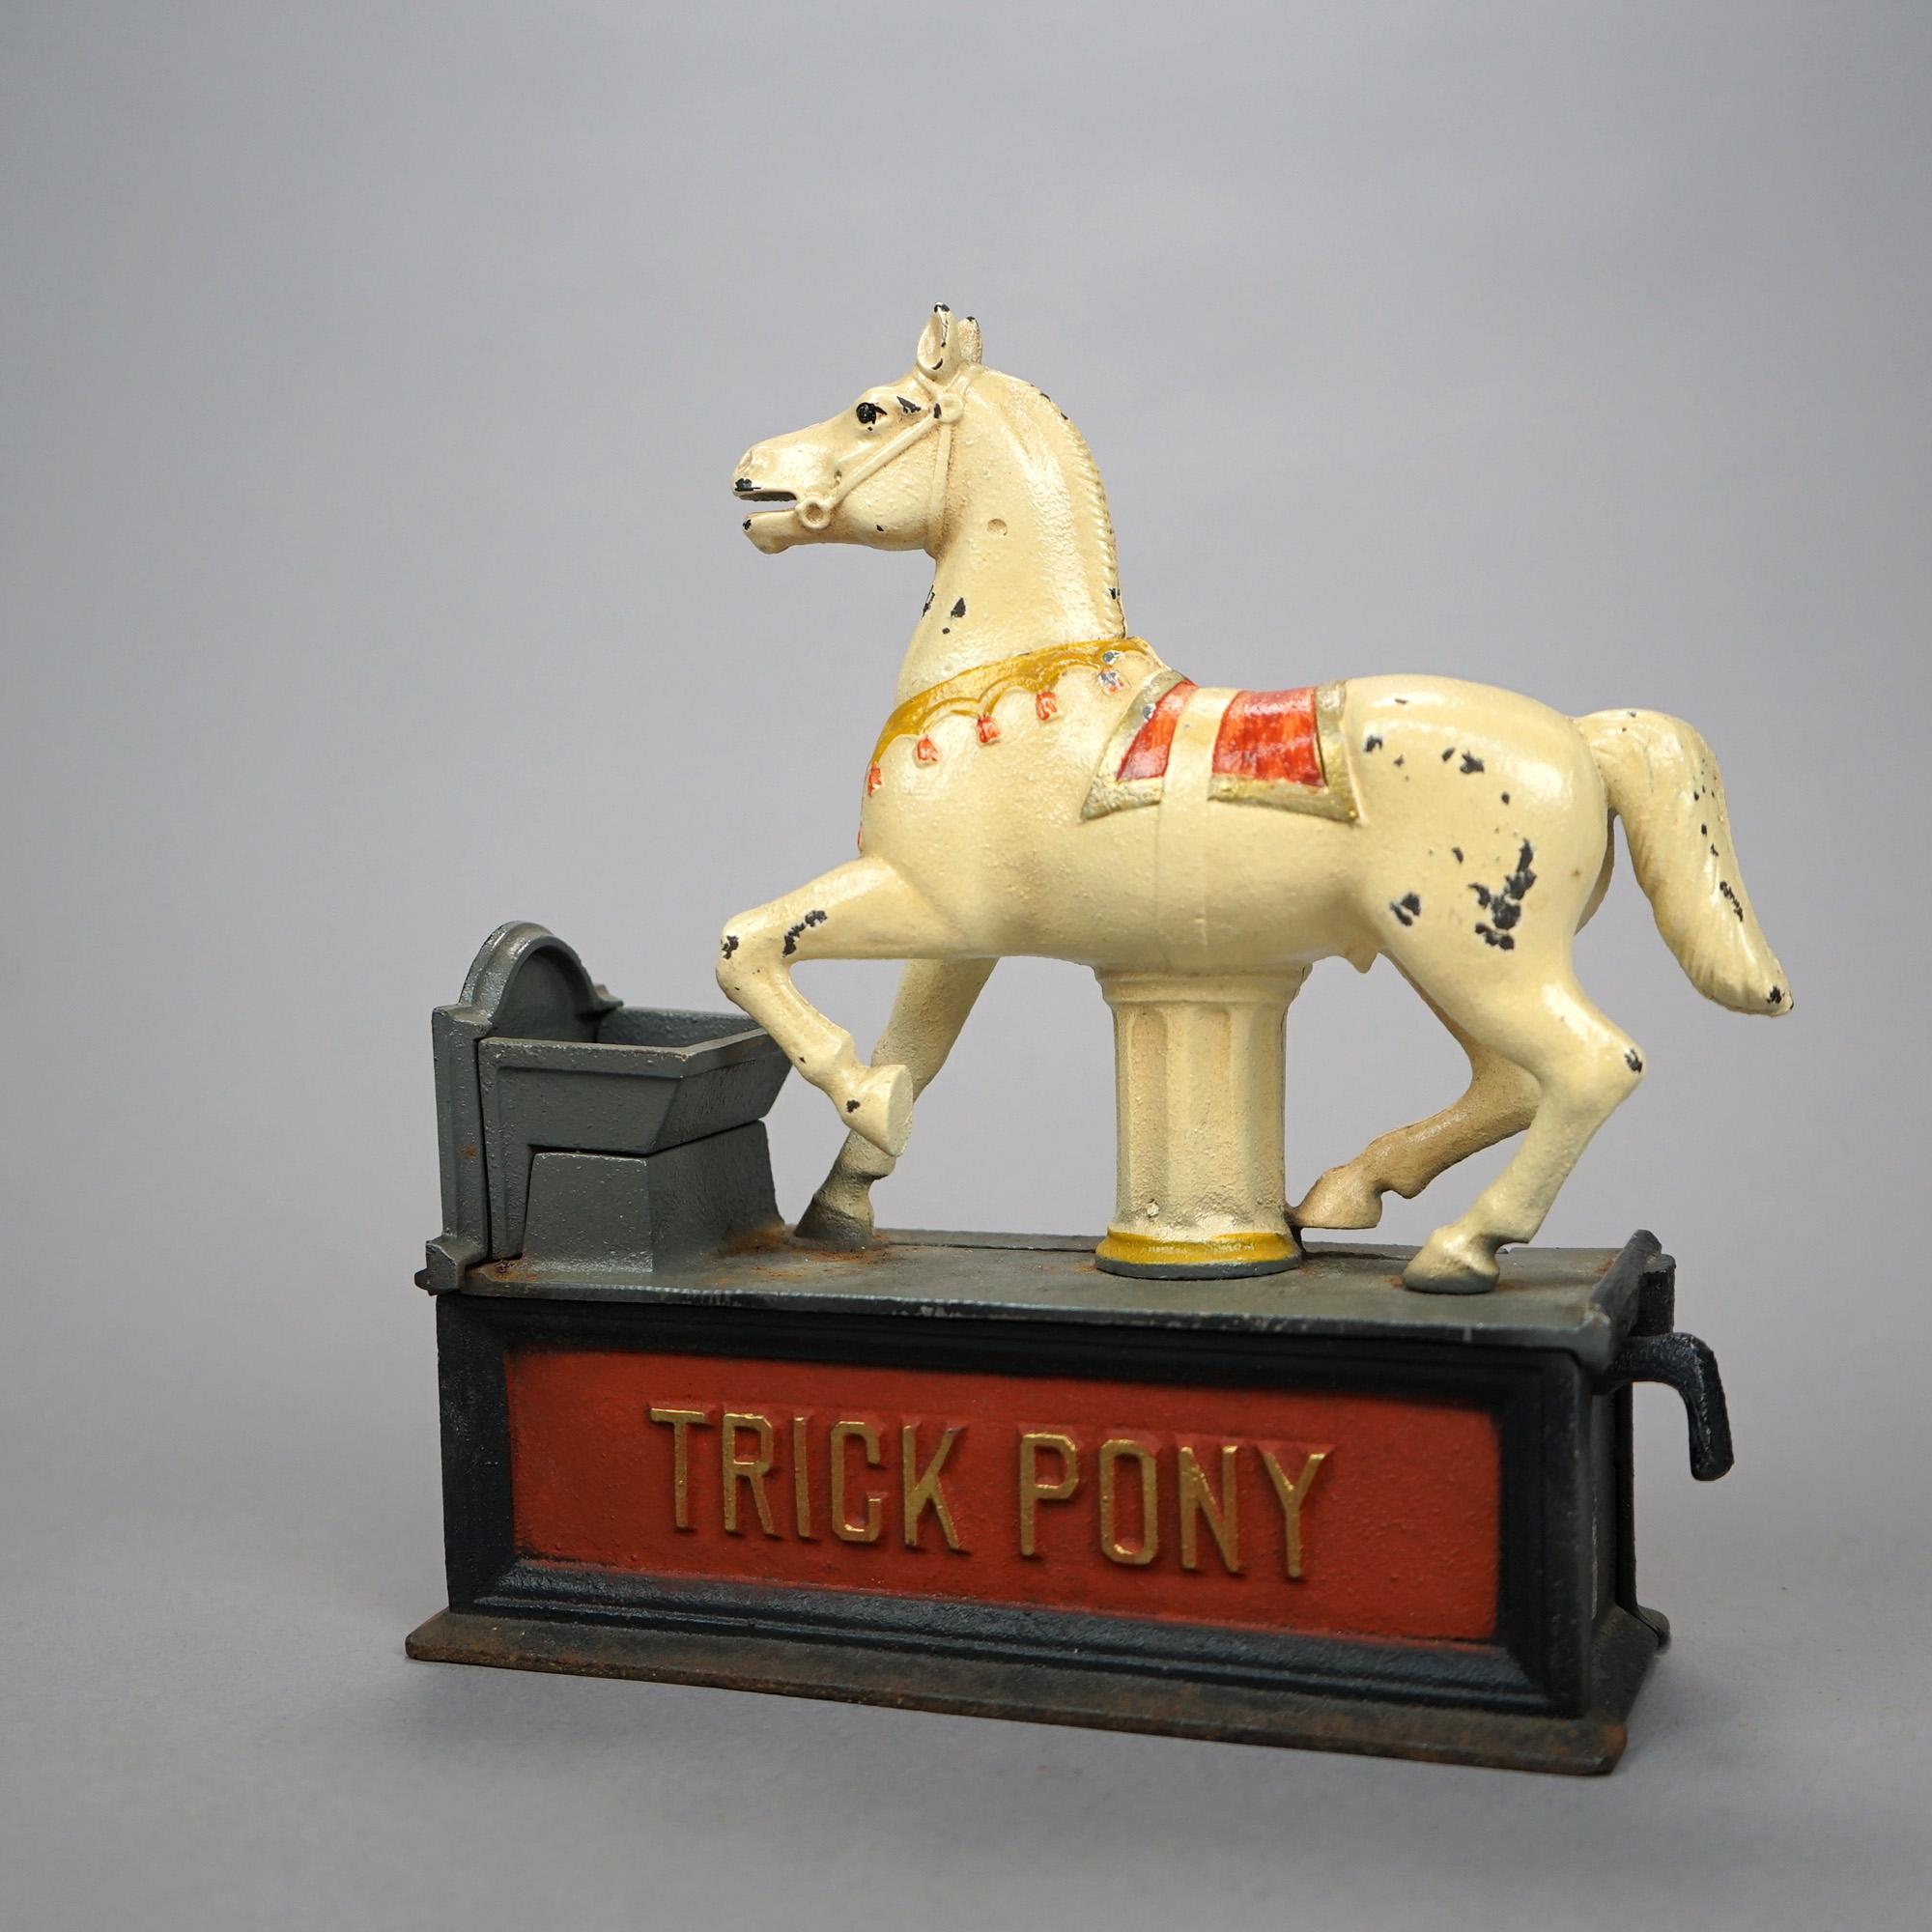 A vintage book of knowledge trick pony mechanical bank offers polychrome cast construction with white circus horse with embossed title, underside reads 